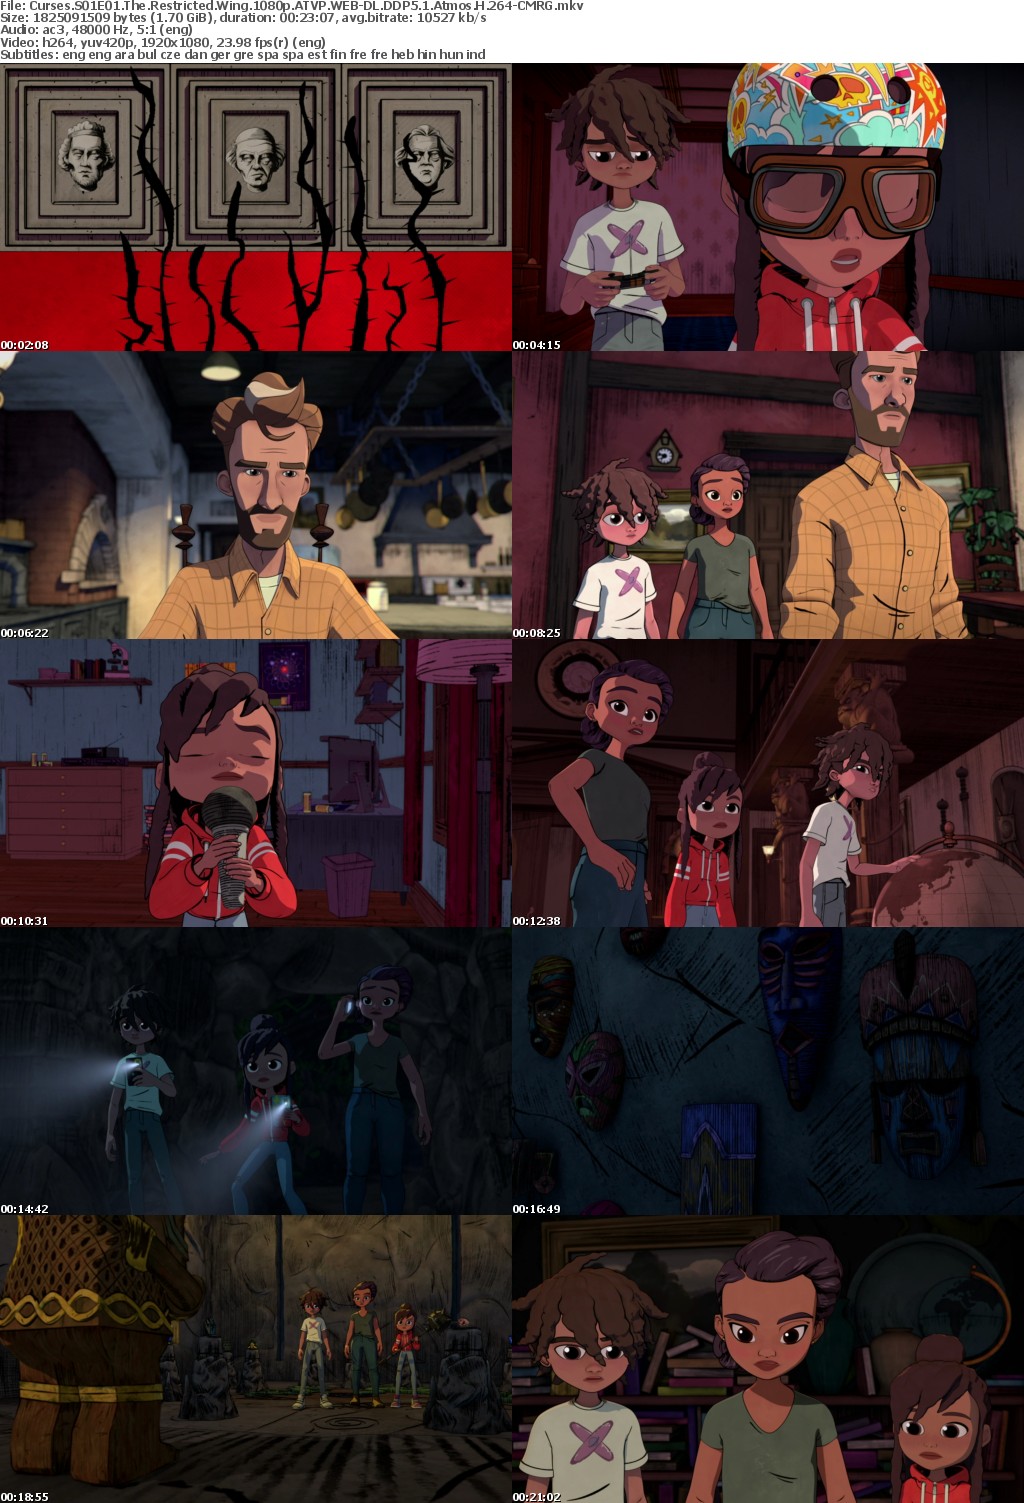 Curses S01E01 The Restricted Wing 1080p ATVP WEB-DL DDP5 1 Atmos H 264-CMRG